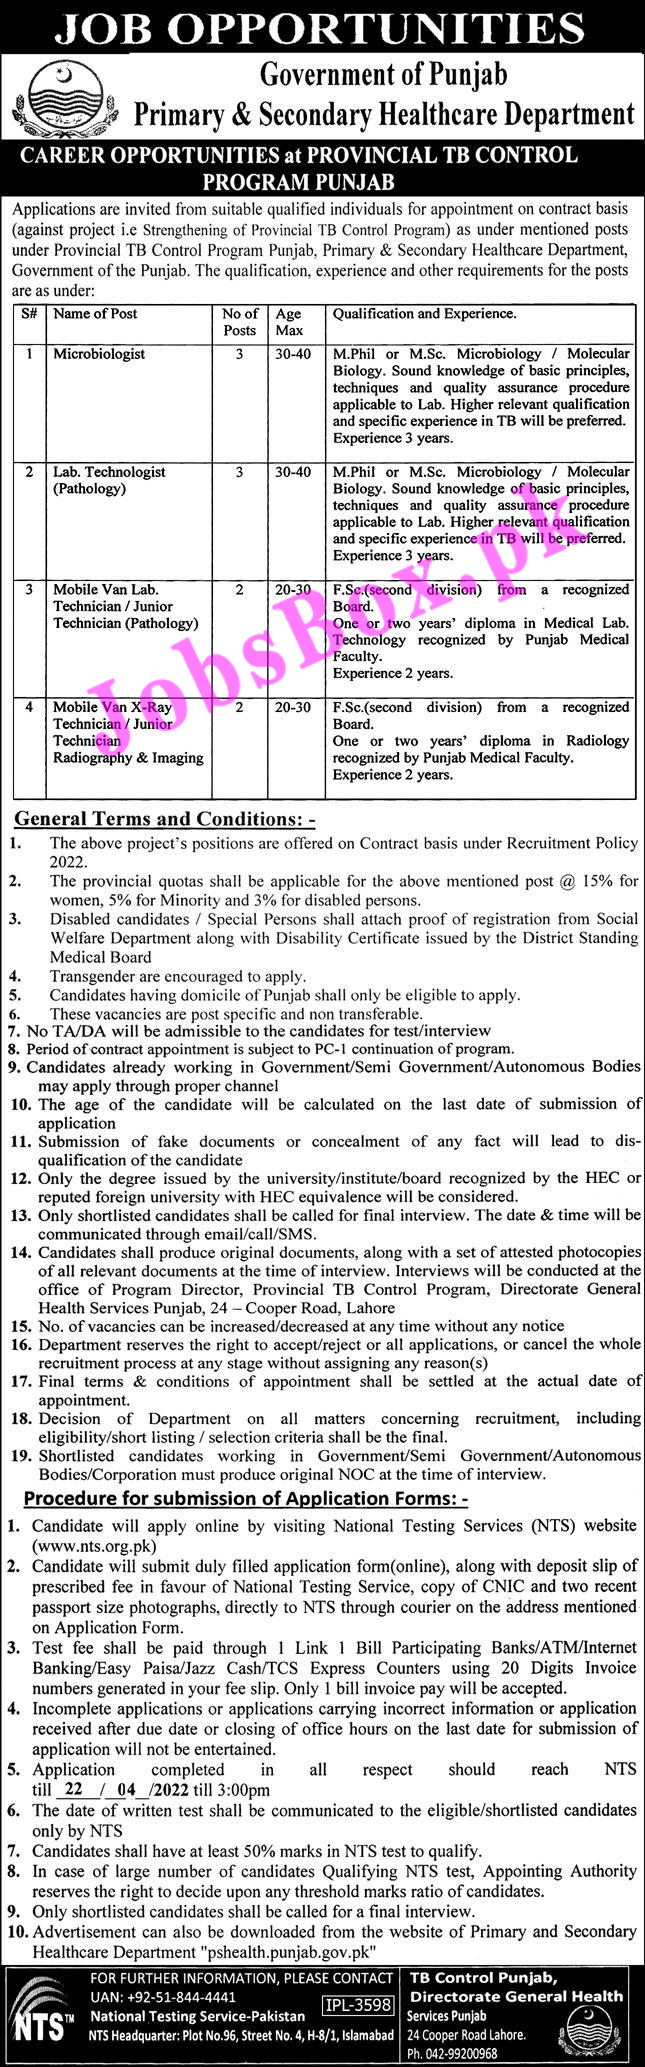 Punjab Primary & Secondary Healthcare Department Jobs 2022